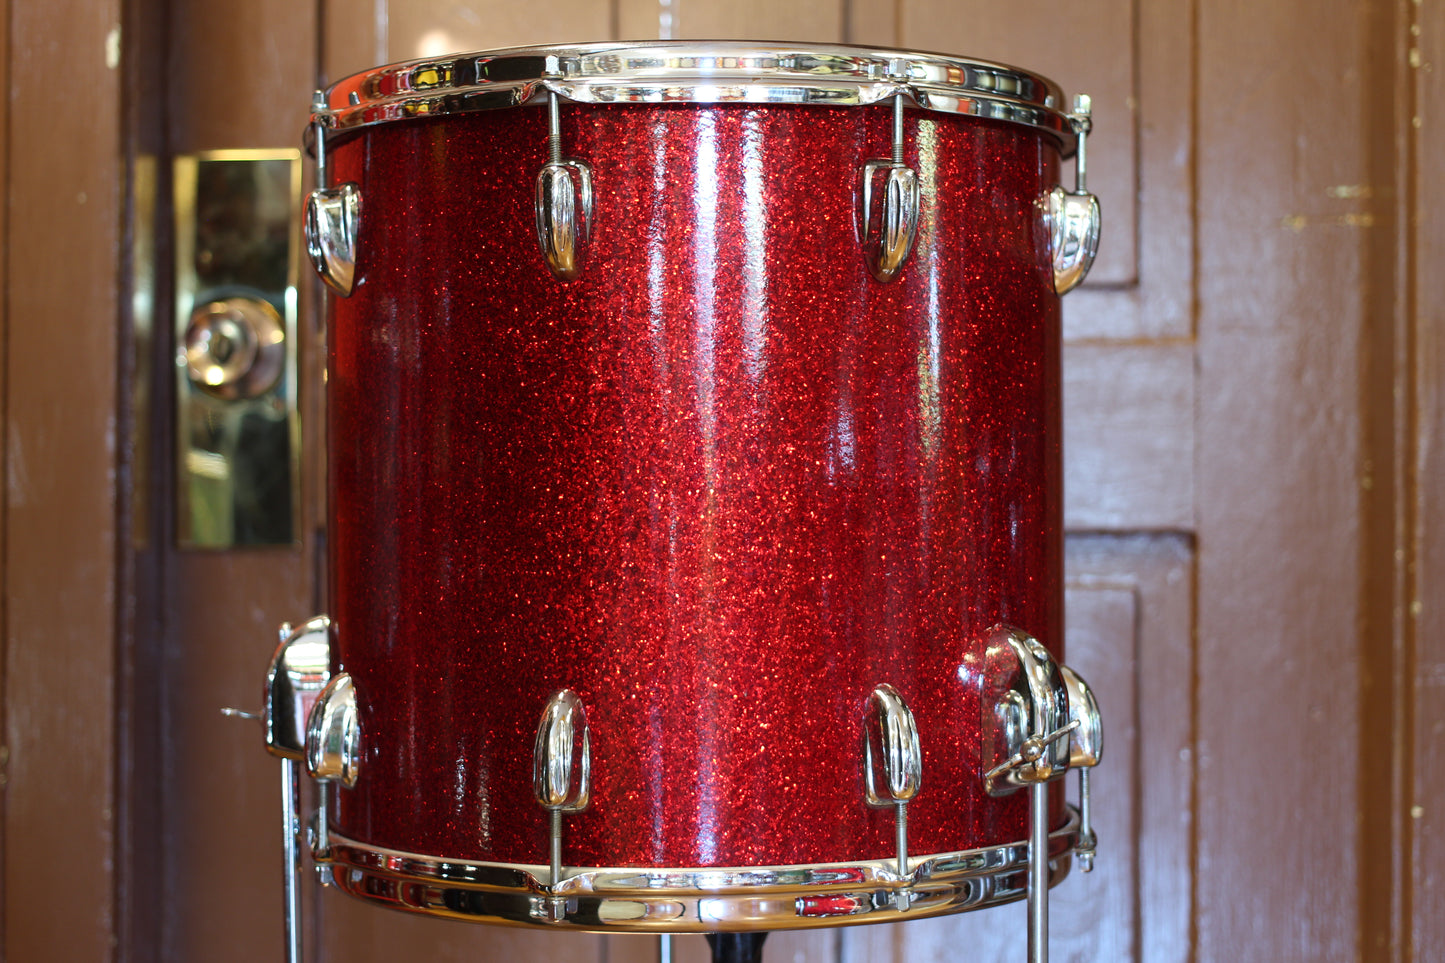 1966 Slingerland Modern Jazz outfit in Sparkling Red Pearl